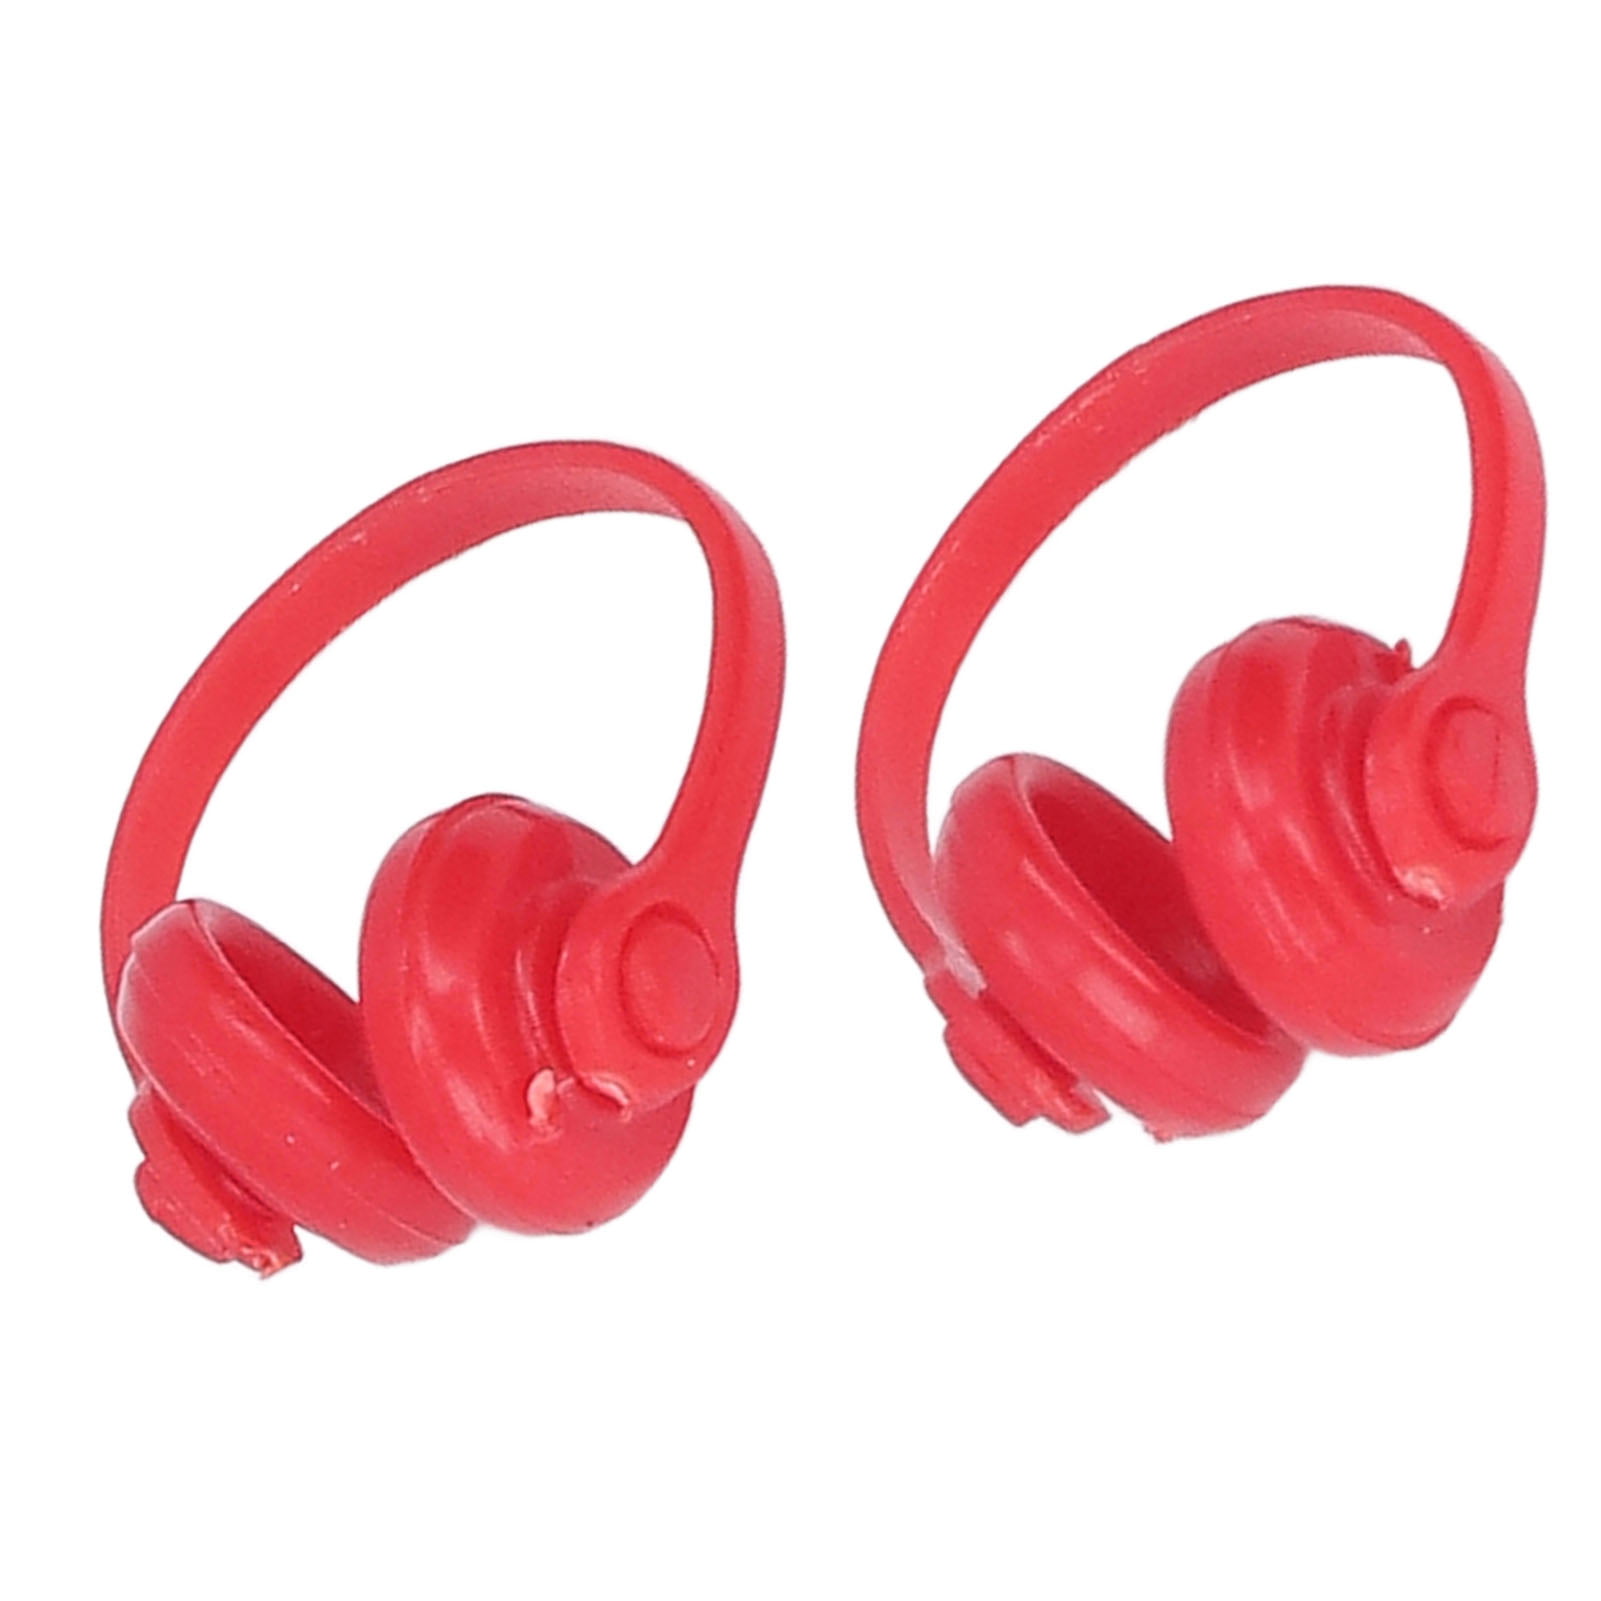 Dolls House Miniature 1/12th Scale Plastic Black or Red Headphones 